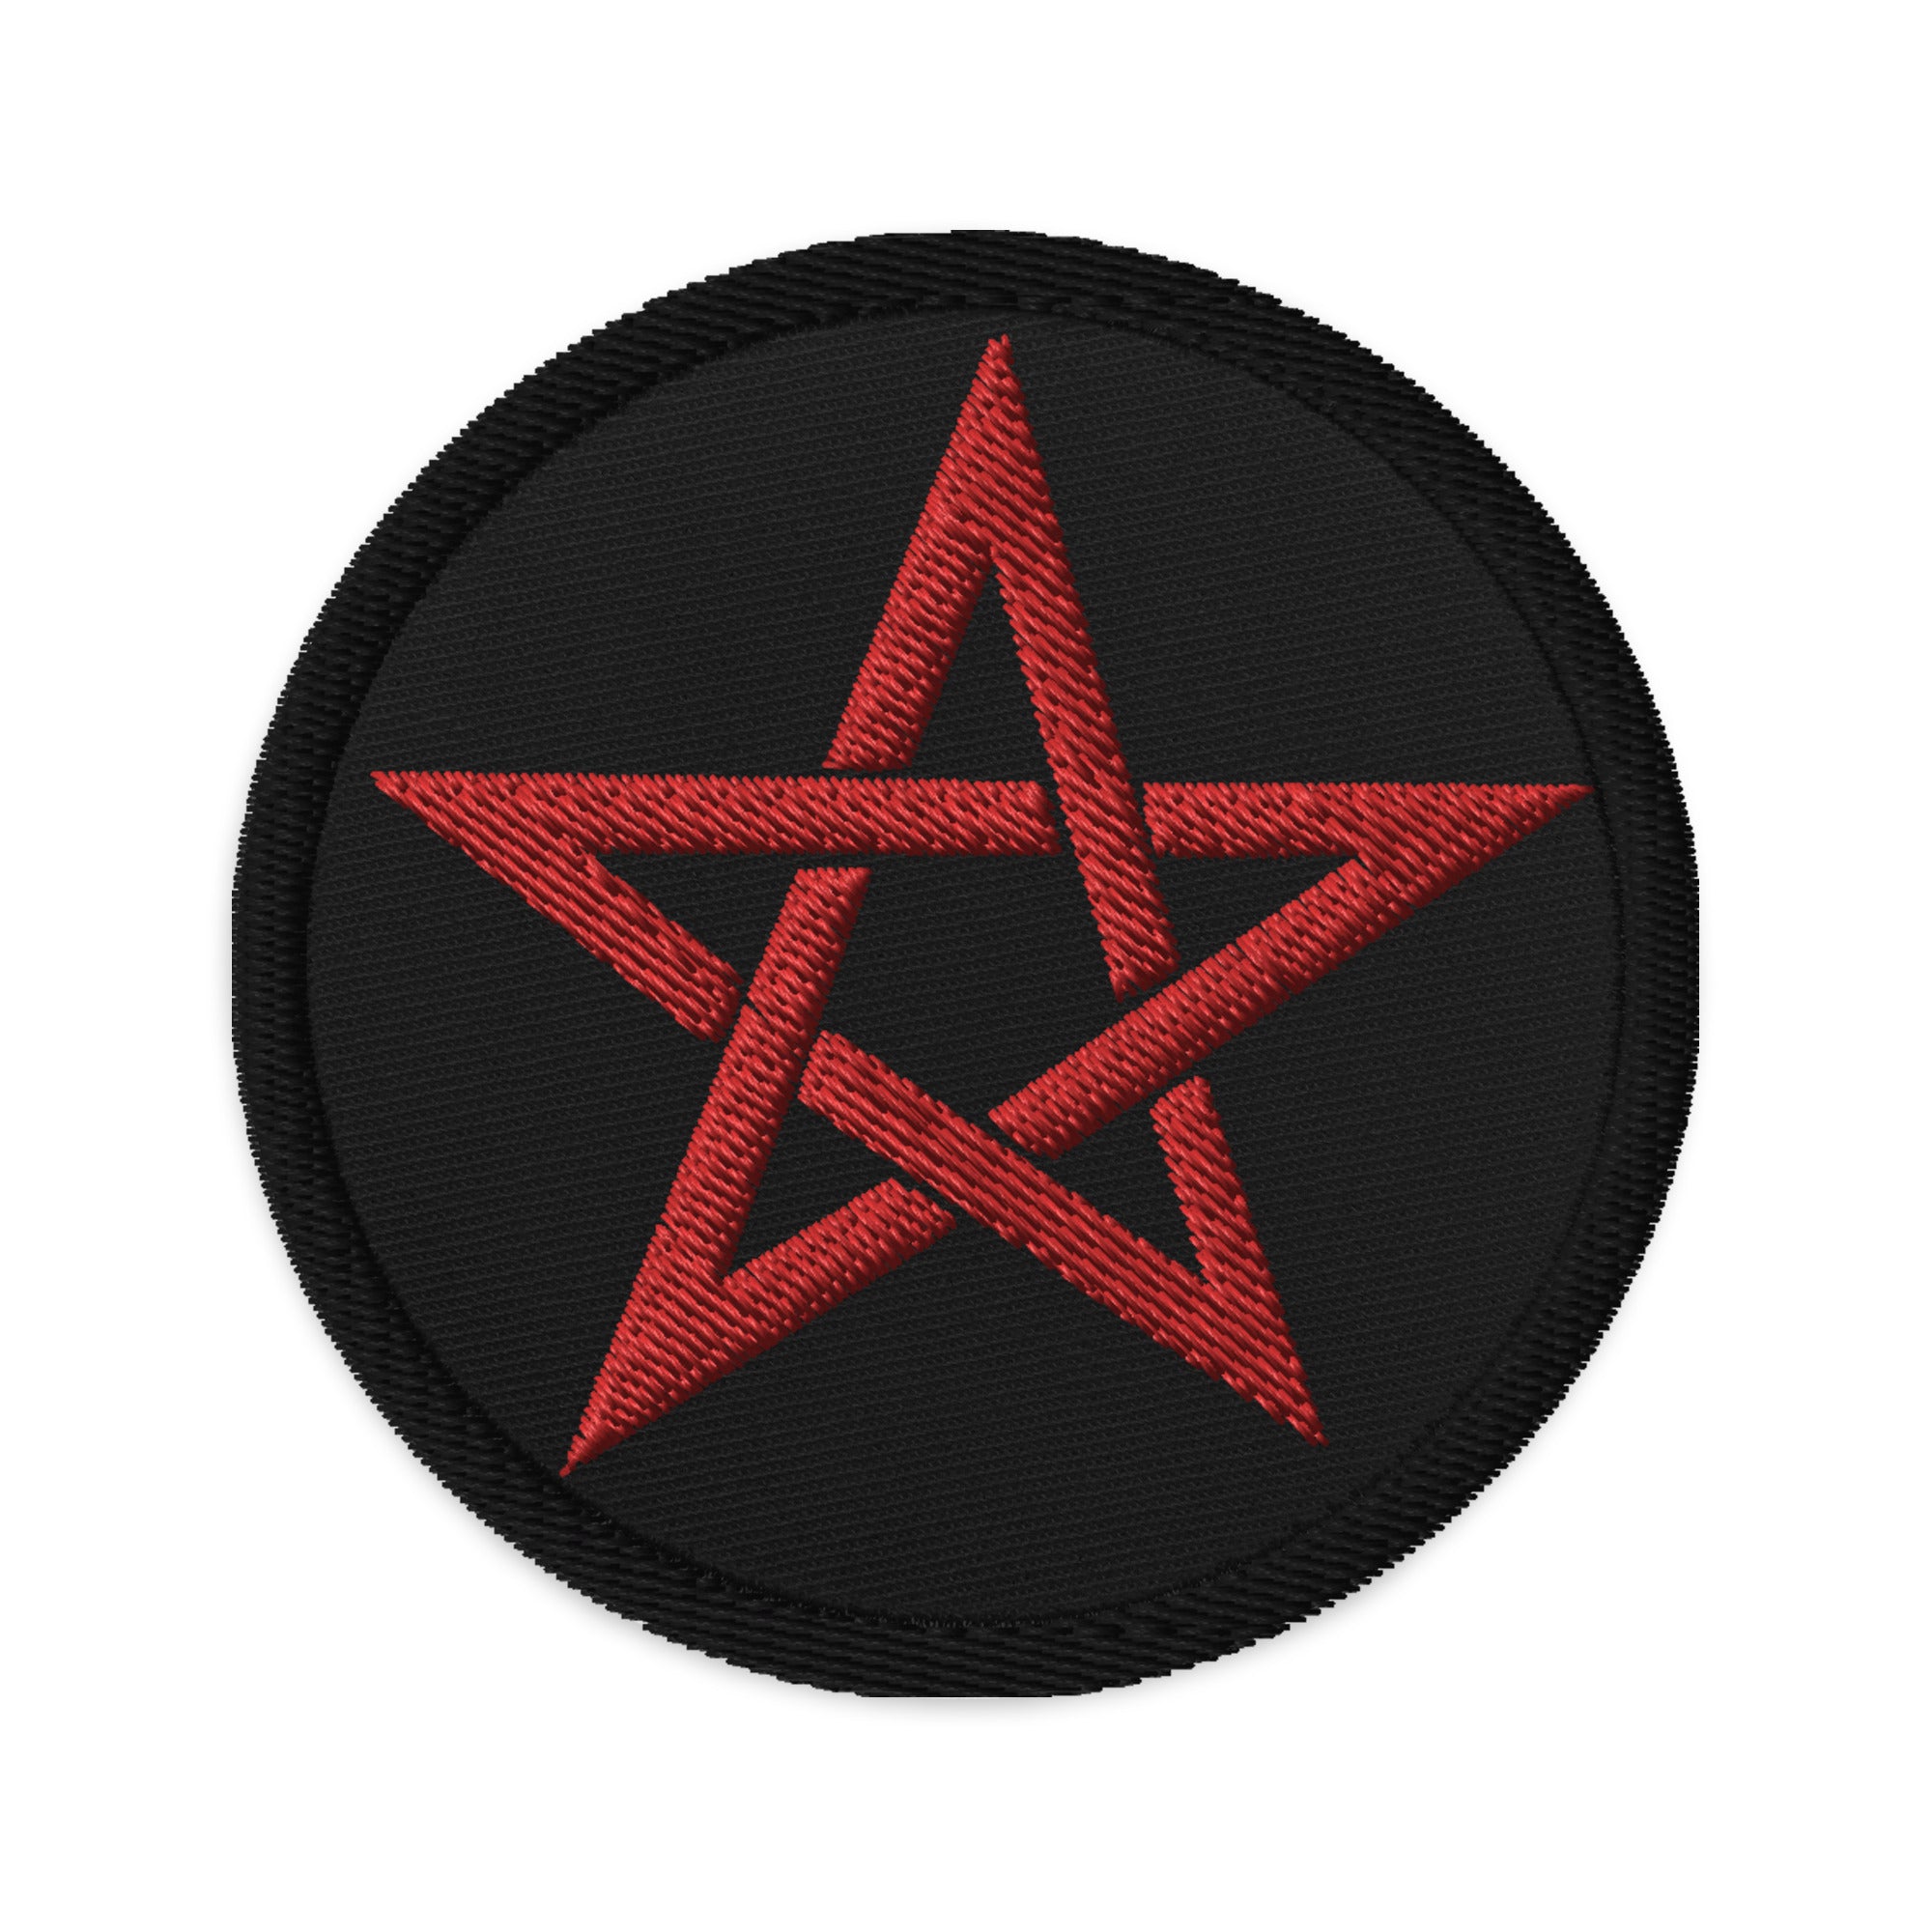 Wiccan Woven Pentagram Symbol Embroidered Patch 5 Point Star - Edge of Life Designs